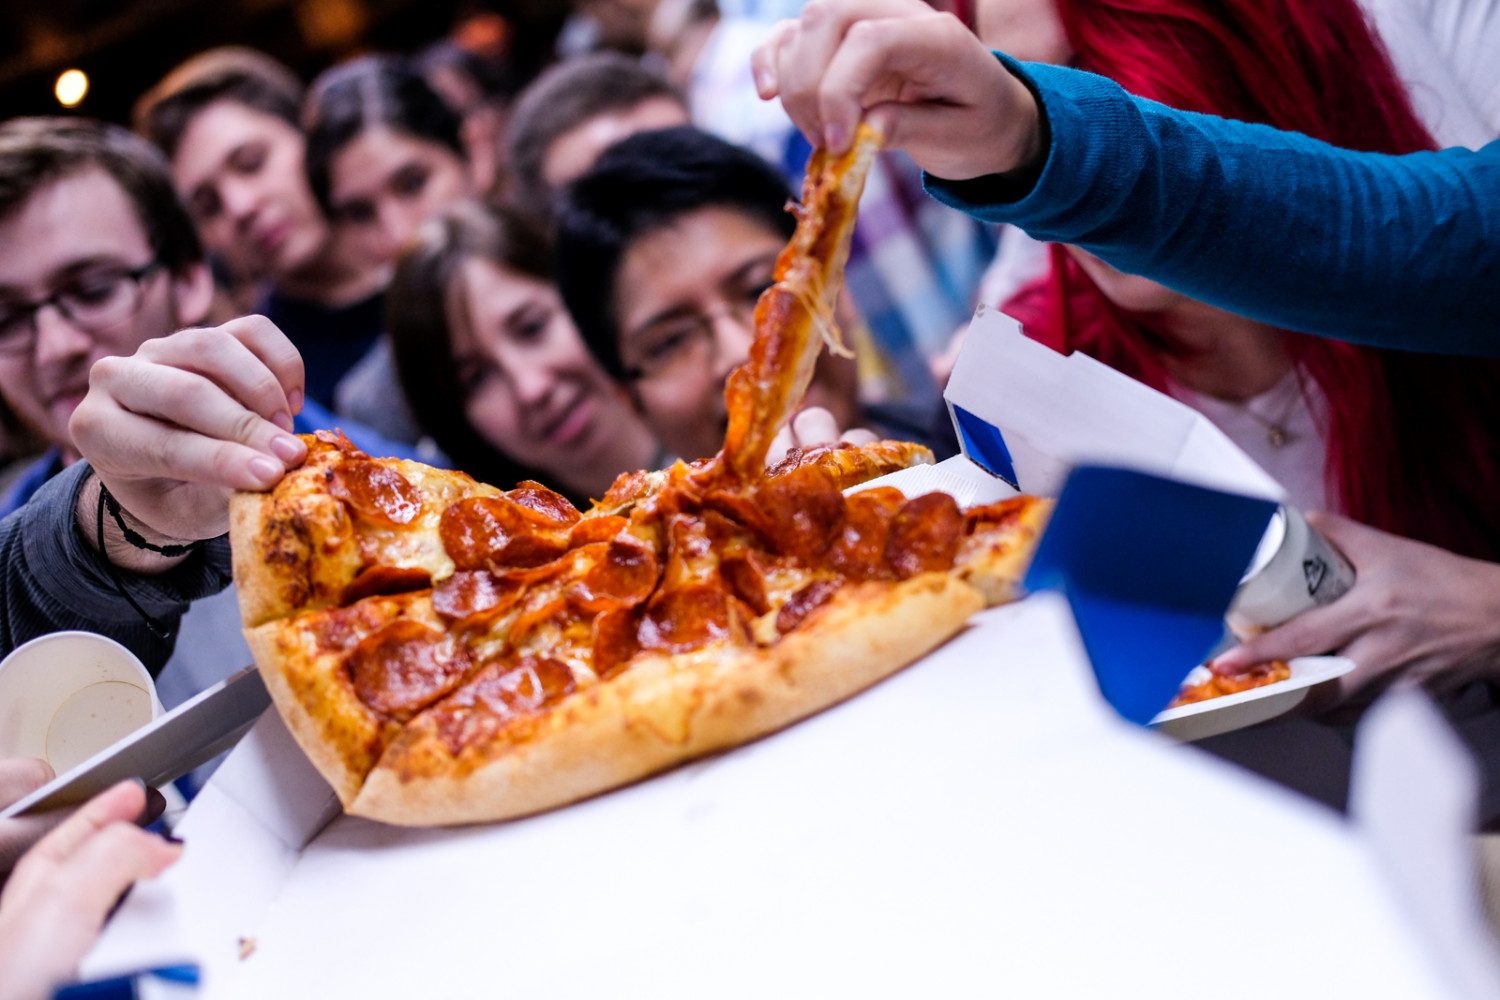 International Pizza Party Sponsored by Domino’s Delivers Happiness for All